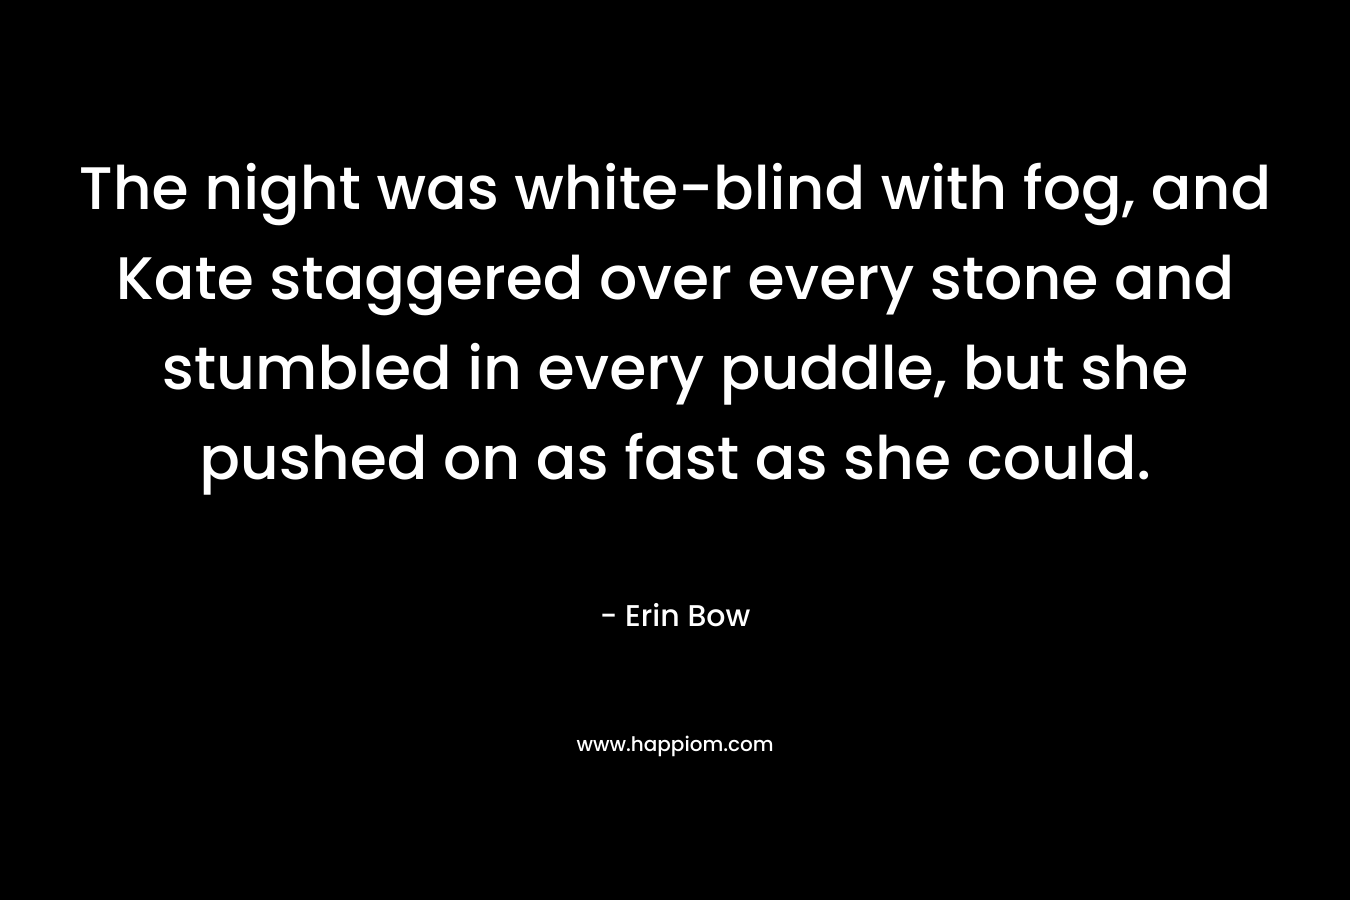 The night was white-blind with fog, and Kate staggered over every stone and stumbled in every puddle, but she pushed on as fast as she could. – Erin Bow